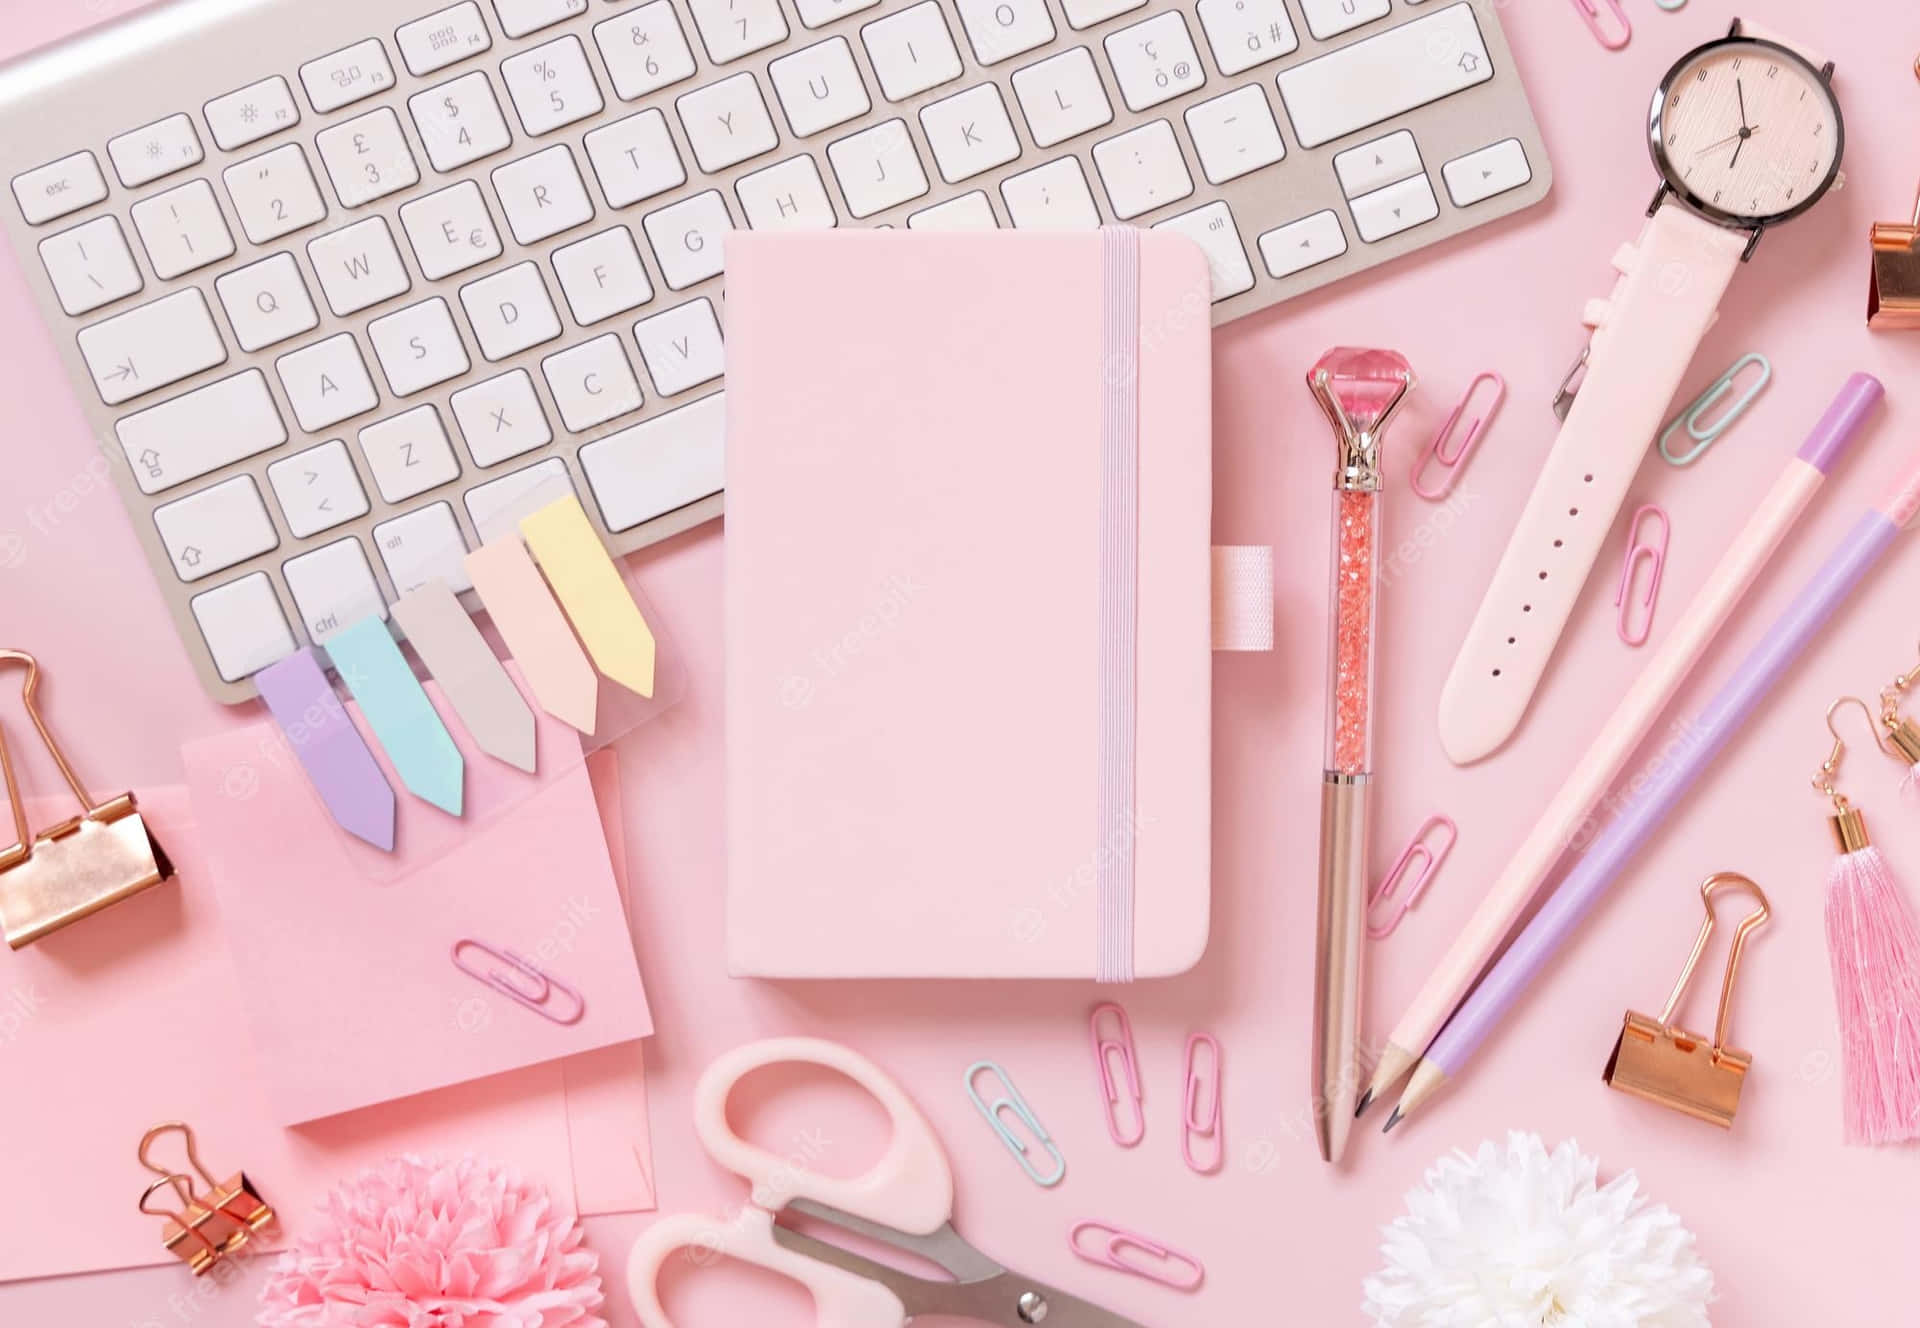 Stay stylish and never be disconnected with this gorgeous girly laptop! Wallpaper